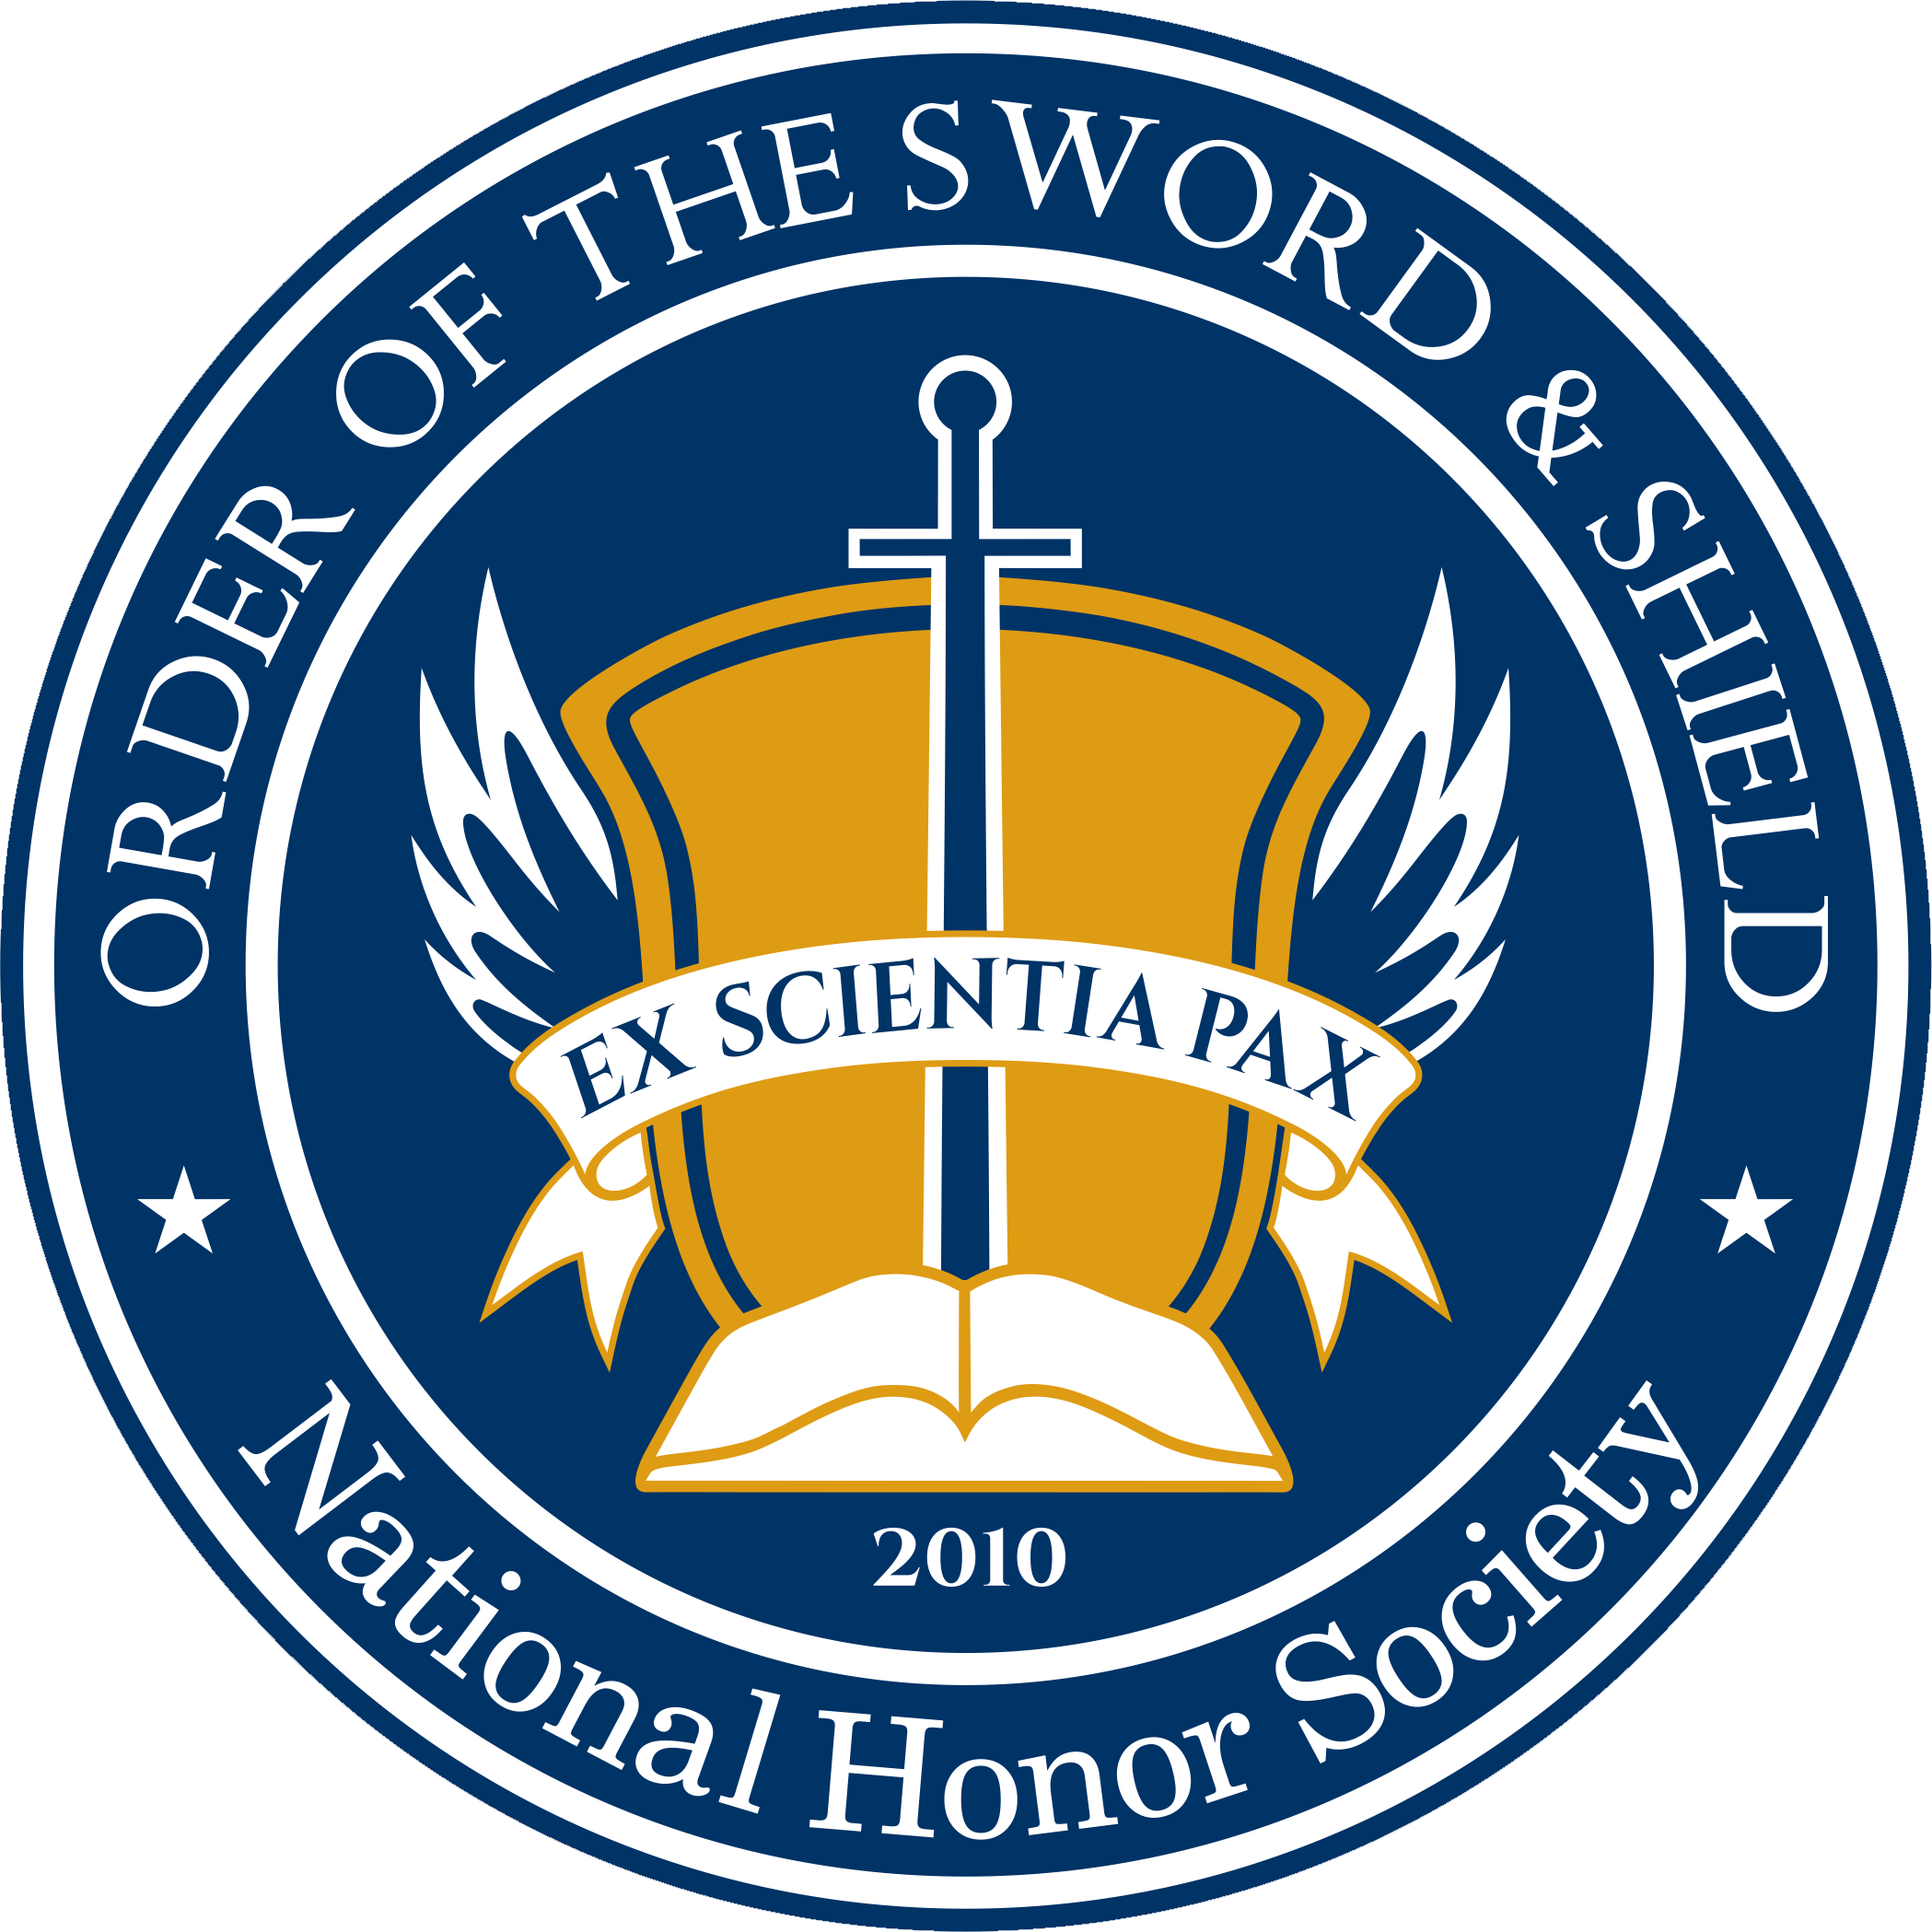 Order of the Sword and Shield: National Honor Society